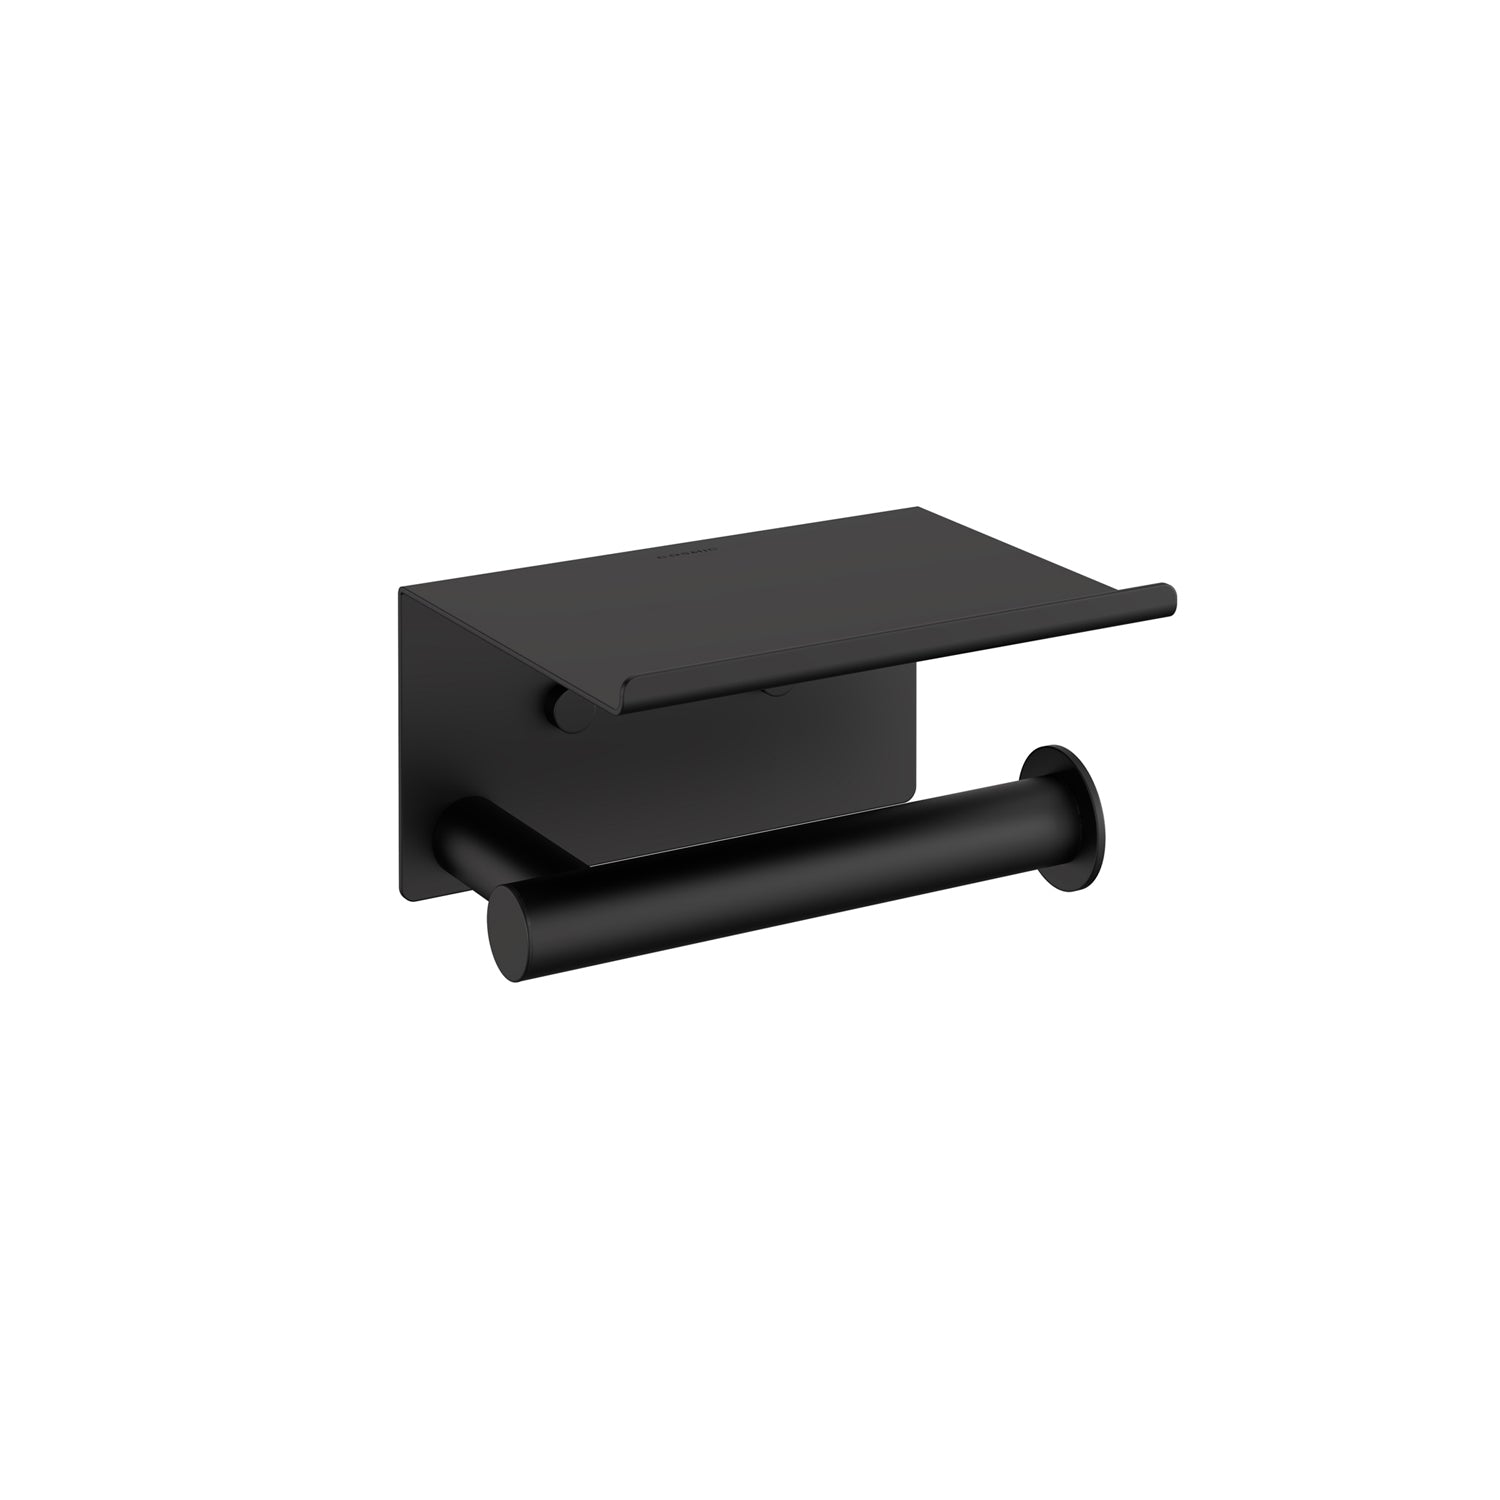 Architect SP paper holder with cover. Matte black (2353659)